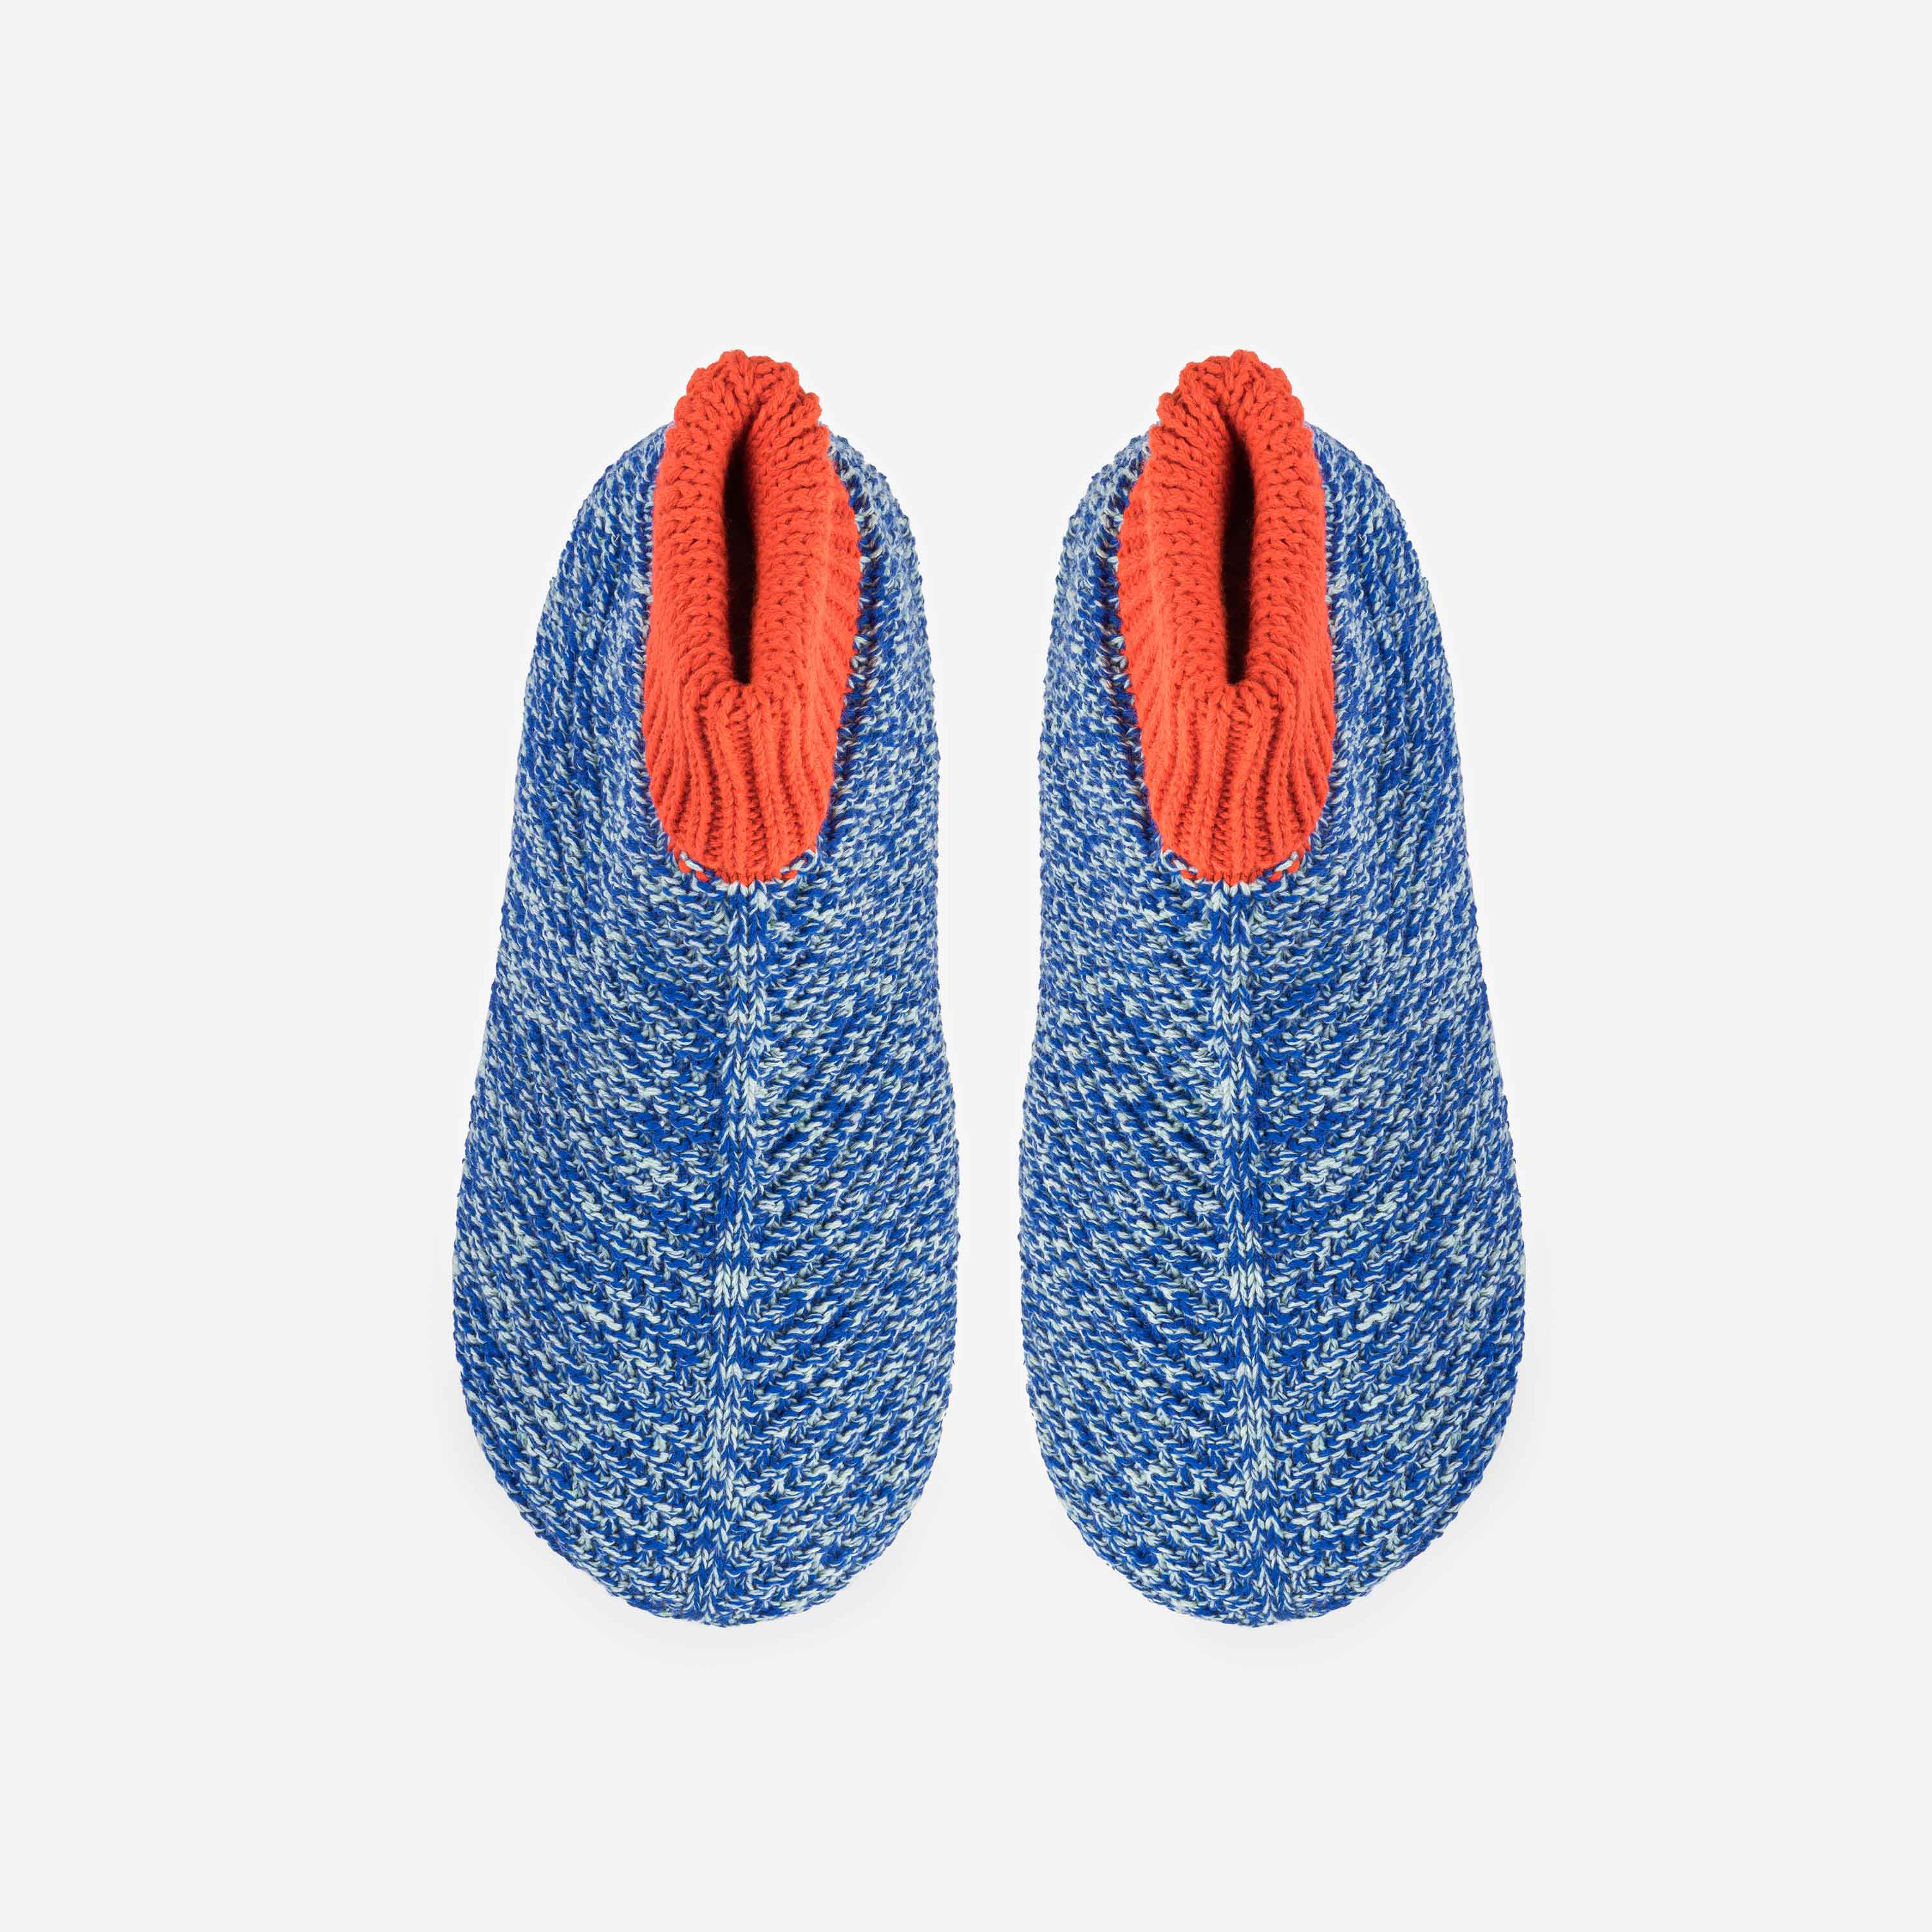 Chevron Knit Bootie Slippers-Sale Cozy Textured Plush Knitted Sock ...